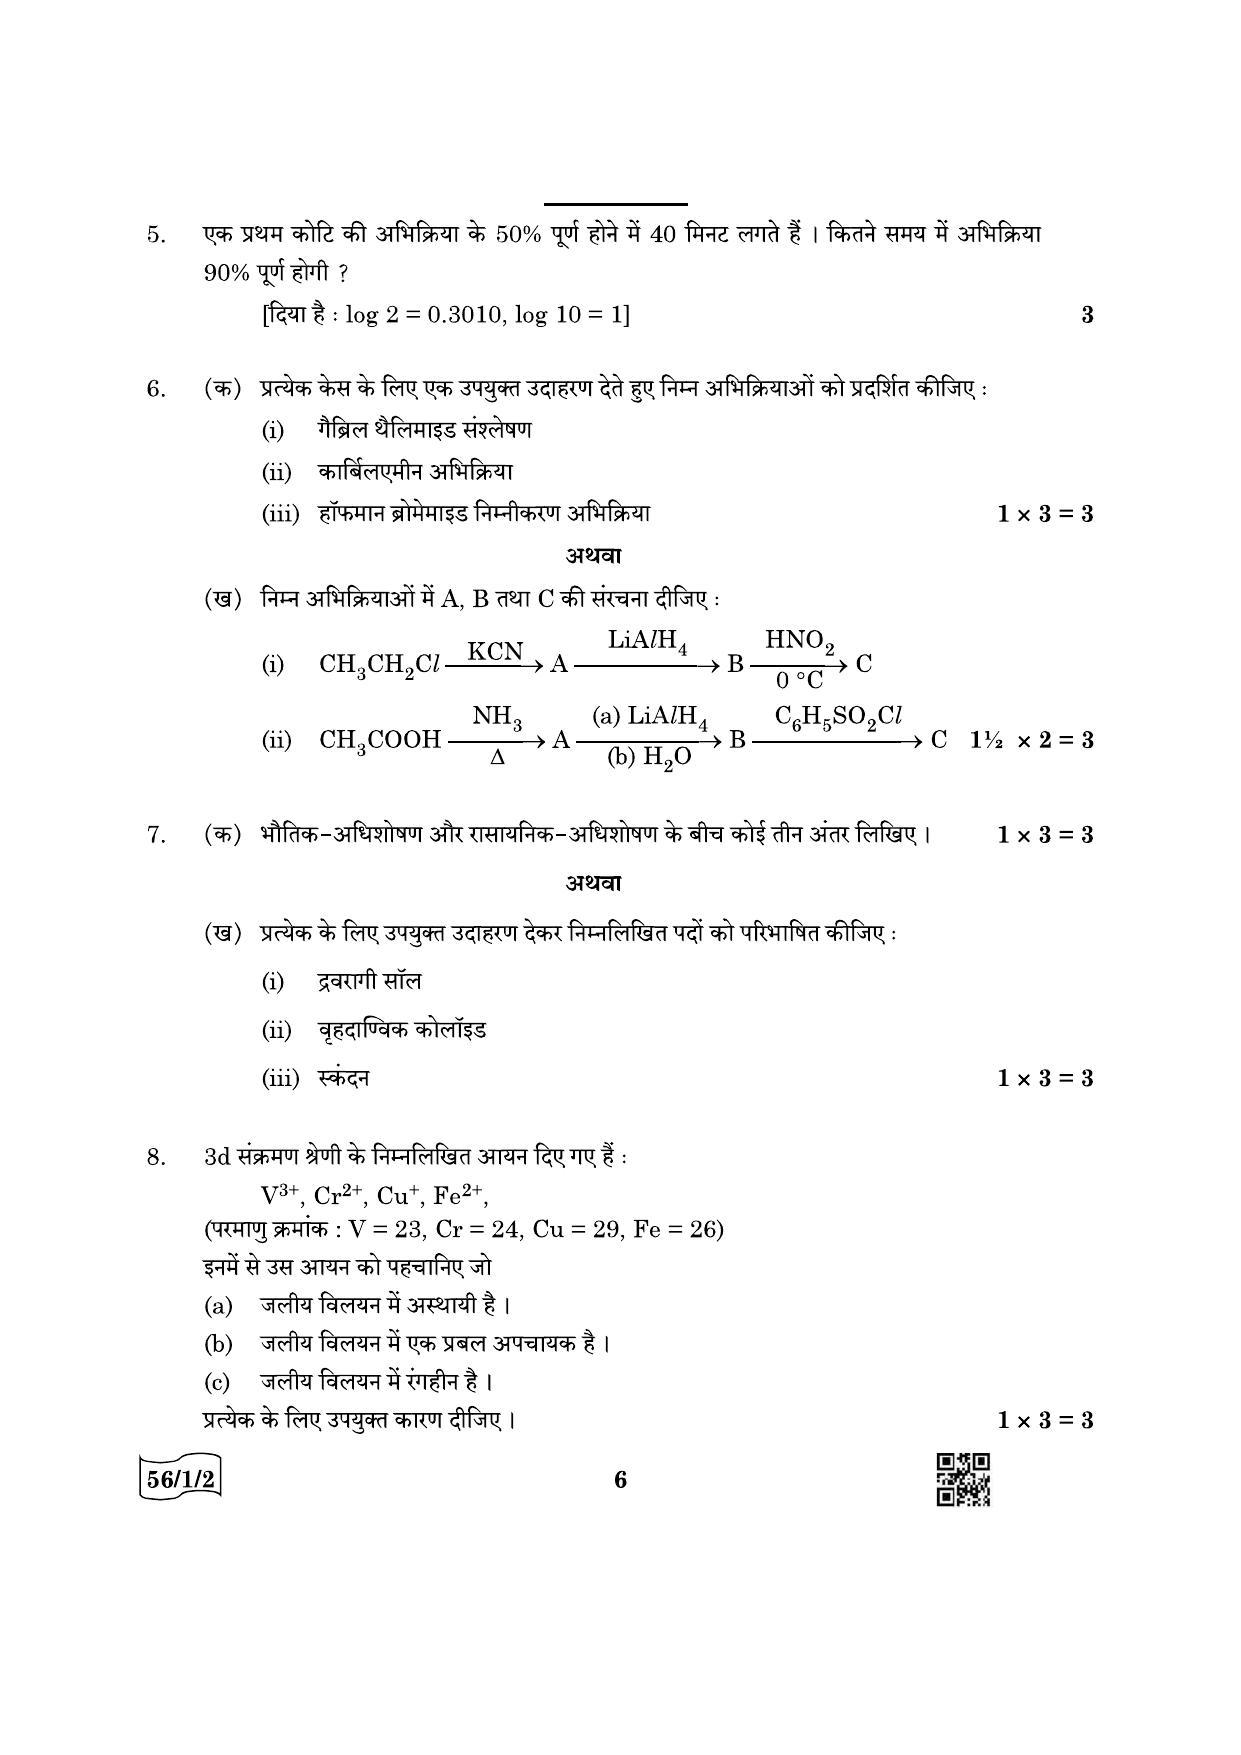 CBSE Class 12 56-1-2 Chemistry 2022 Question Paper - Page 6